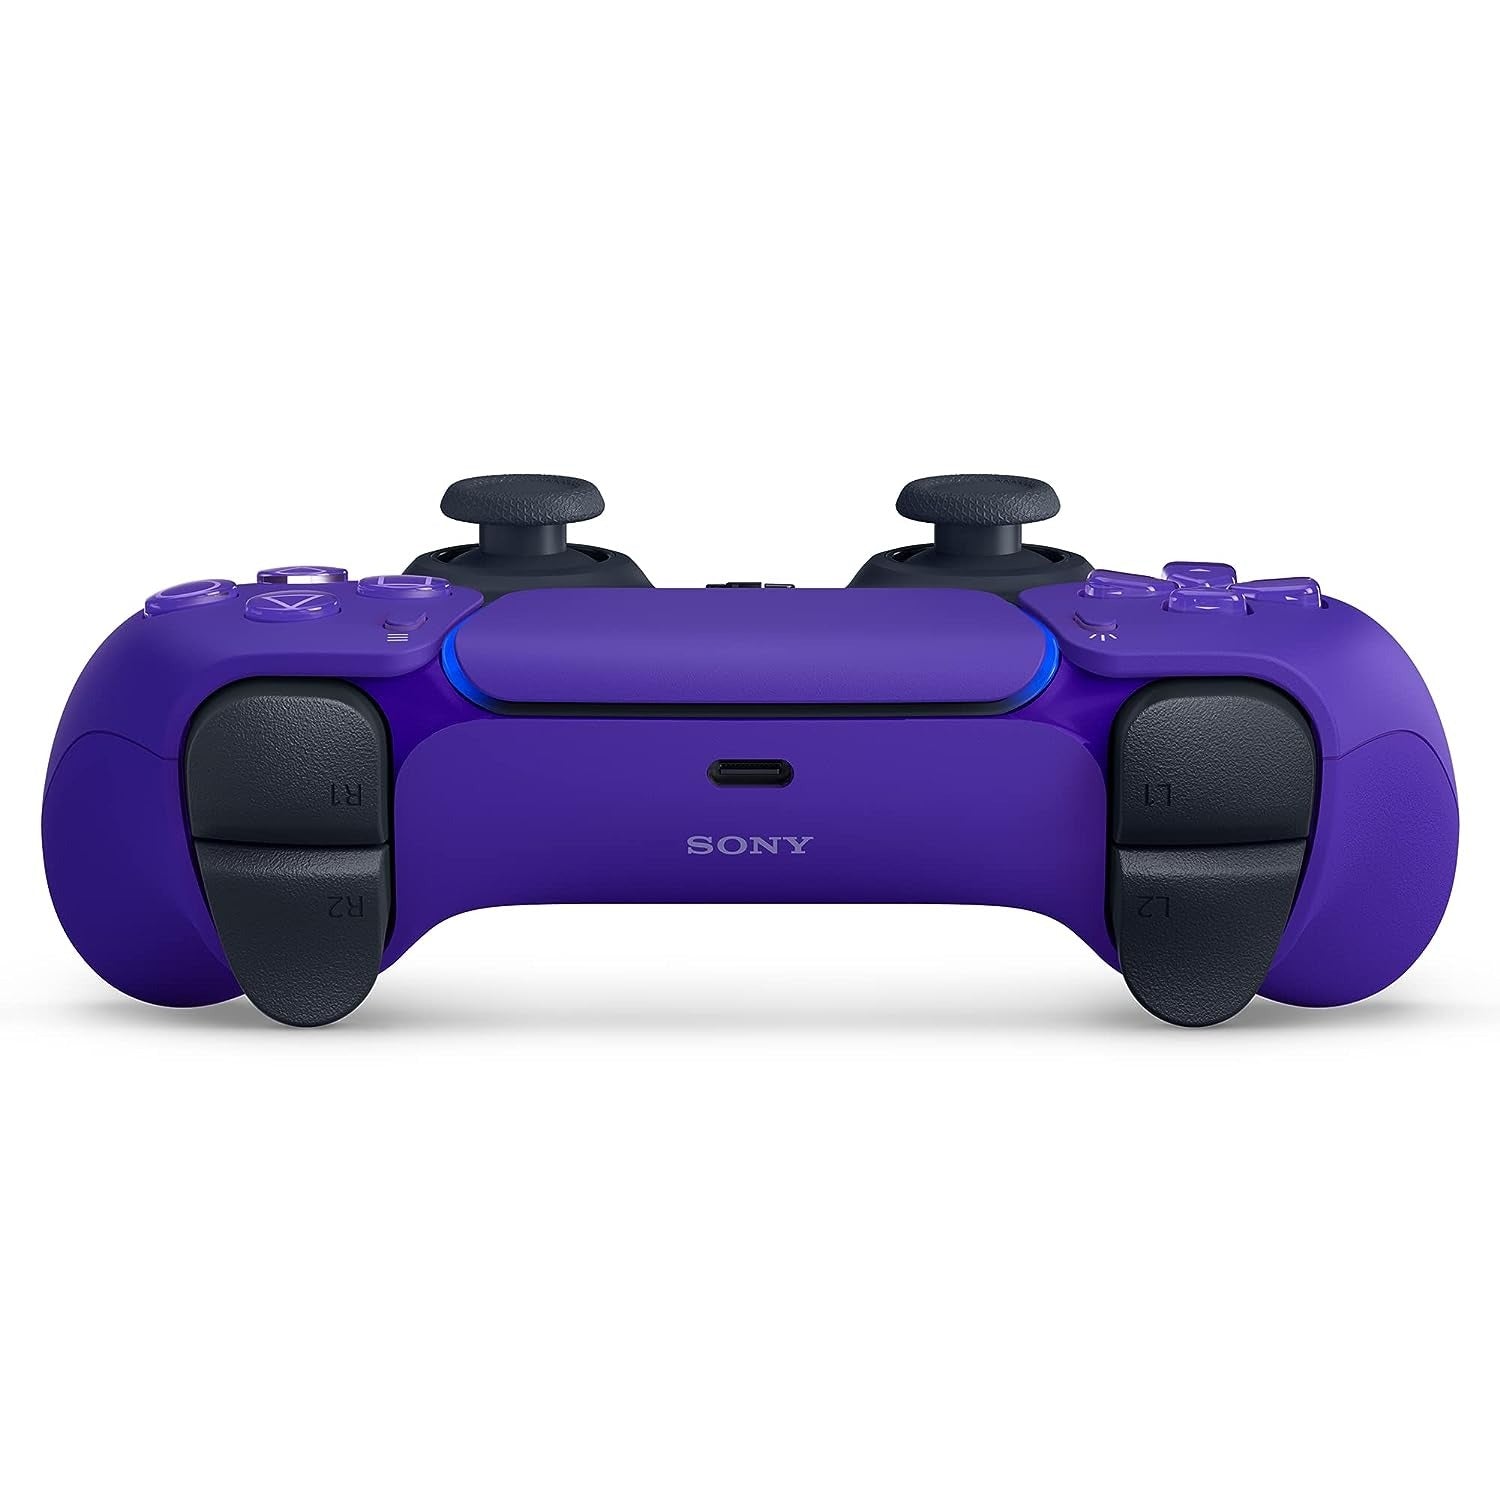 Sony Playstation 5 DualSense Wireless Controller - Galactic Purple (Pre-Owned)